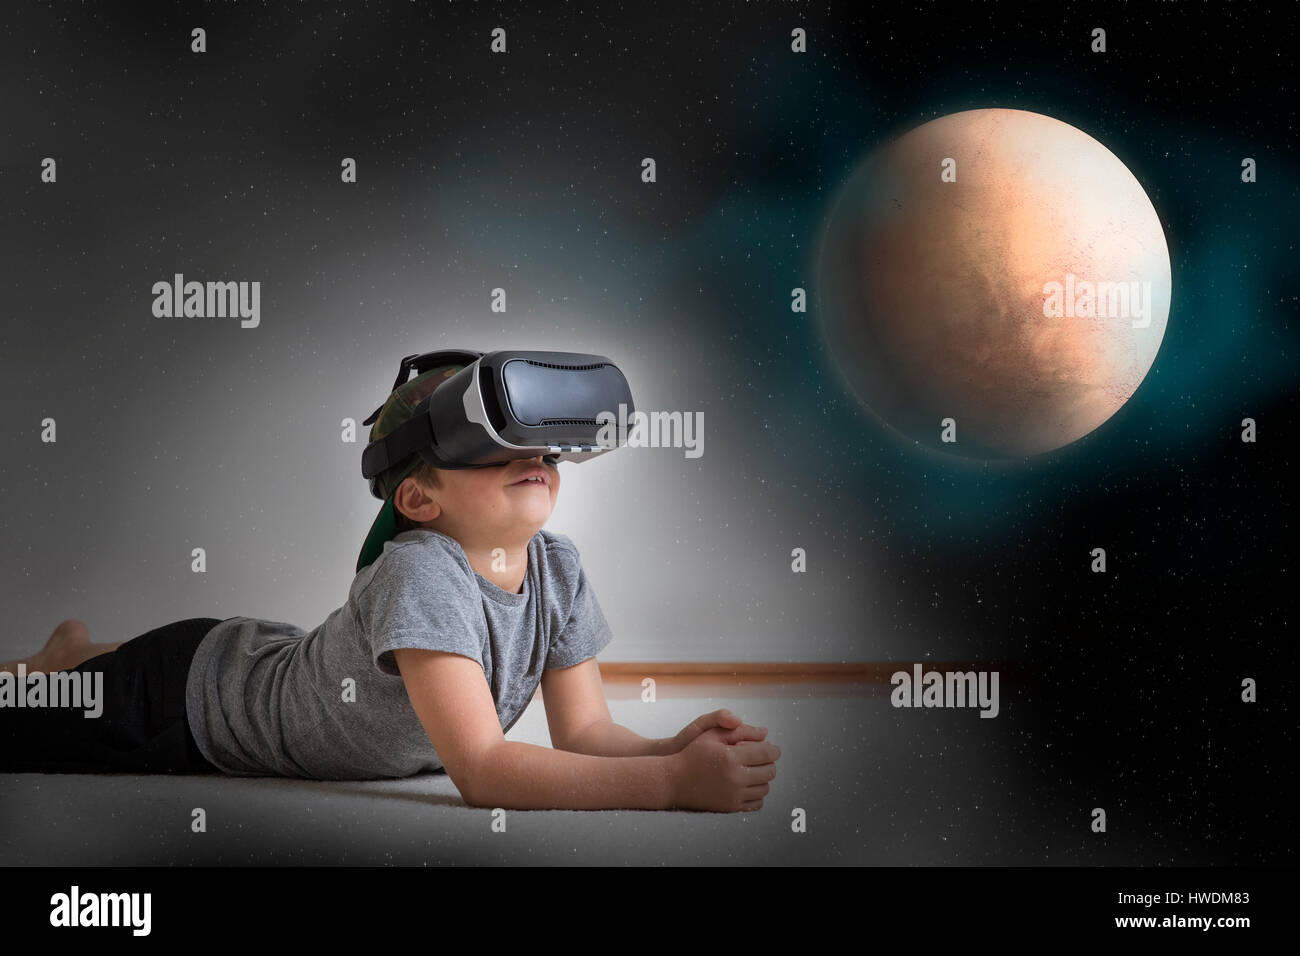 Young boy lying on floor, wearing virtual reality headset, looking at planet, digital composite Stock Photo